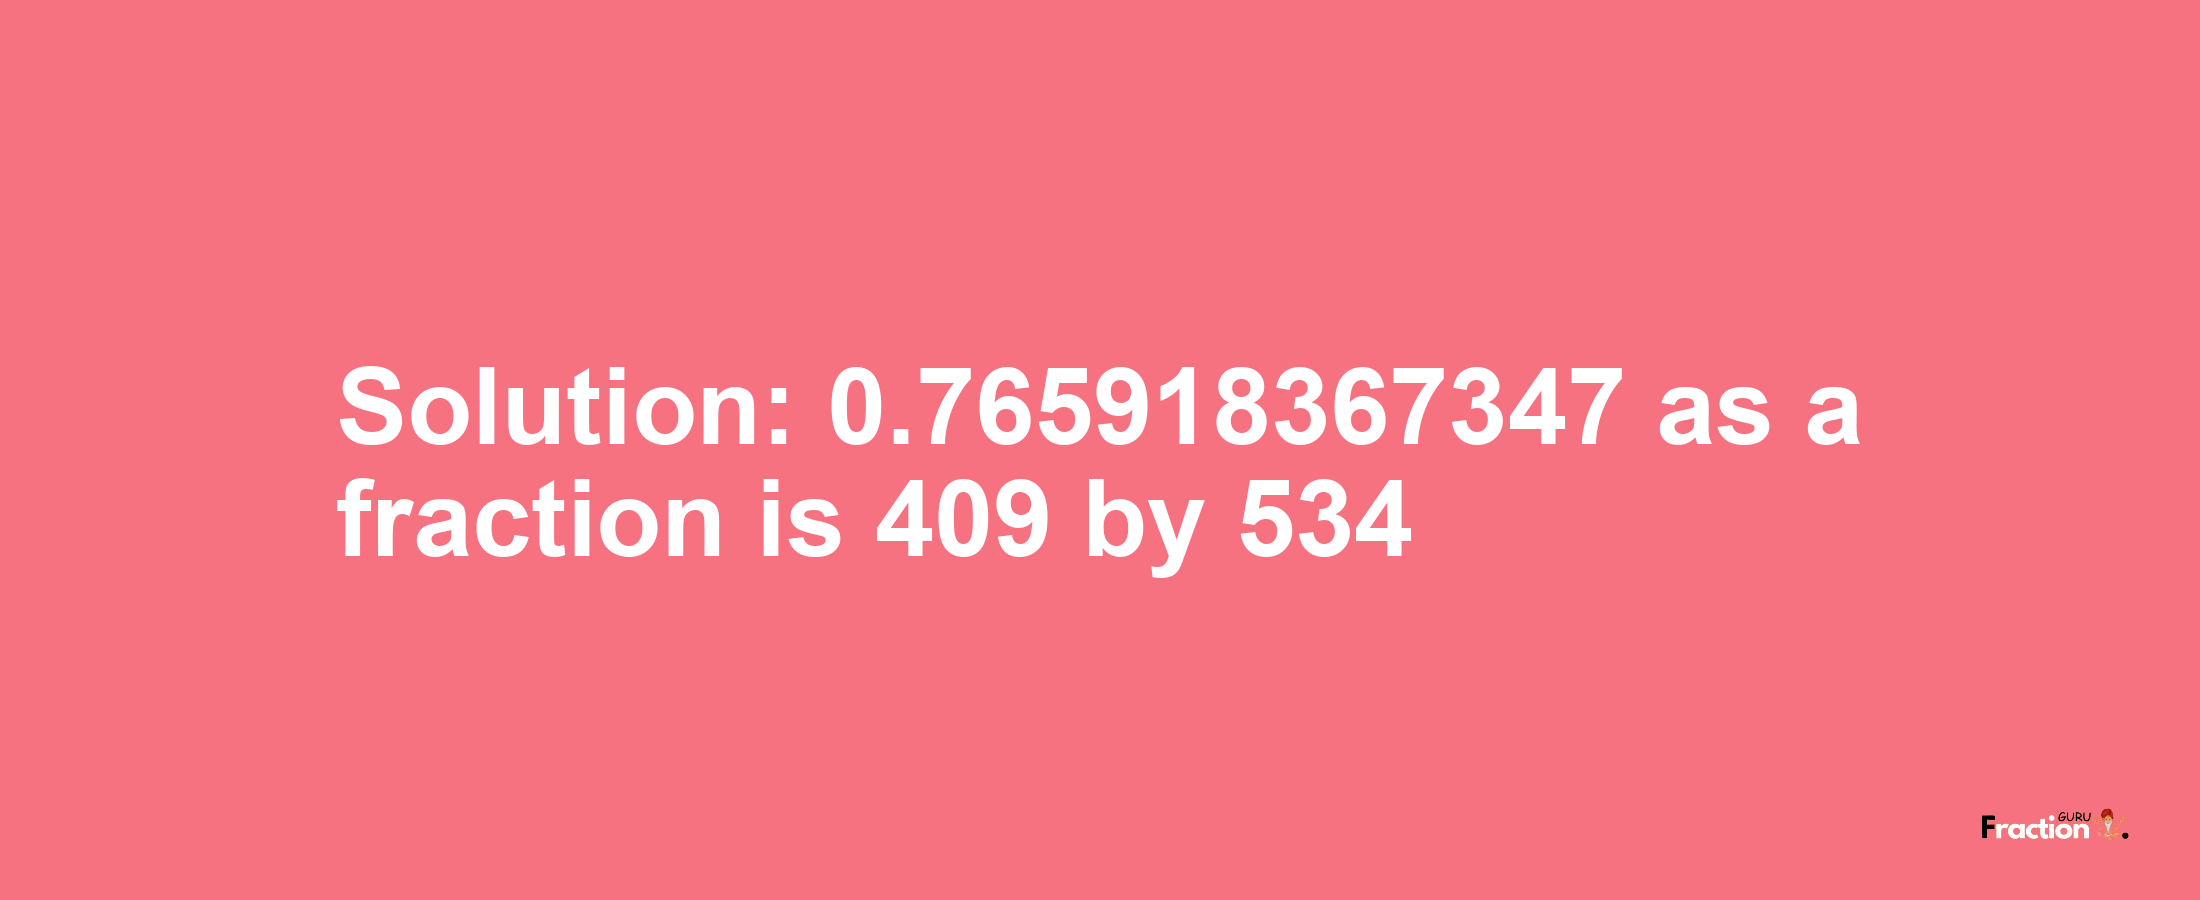 Solution:0.765918367347 as a fraction is 409/534